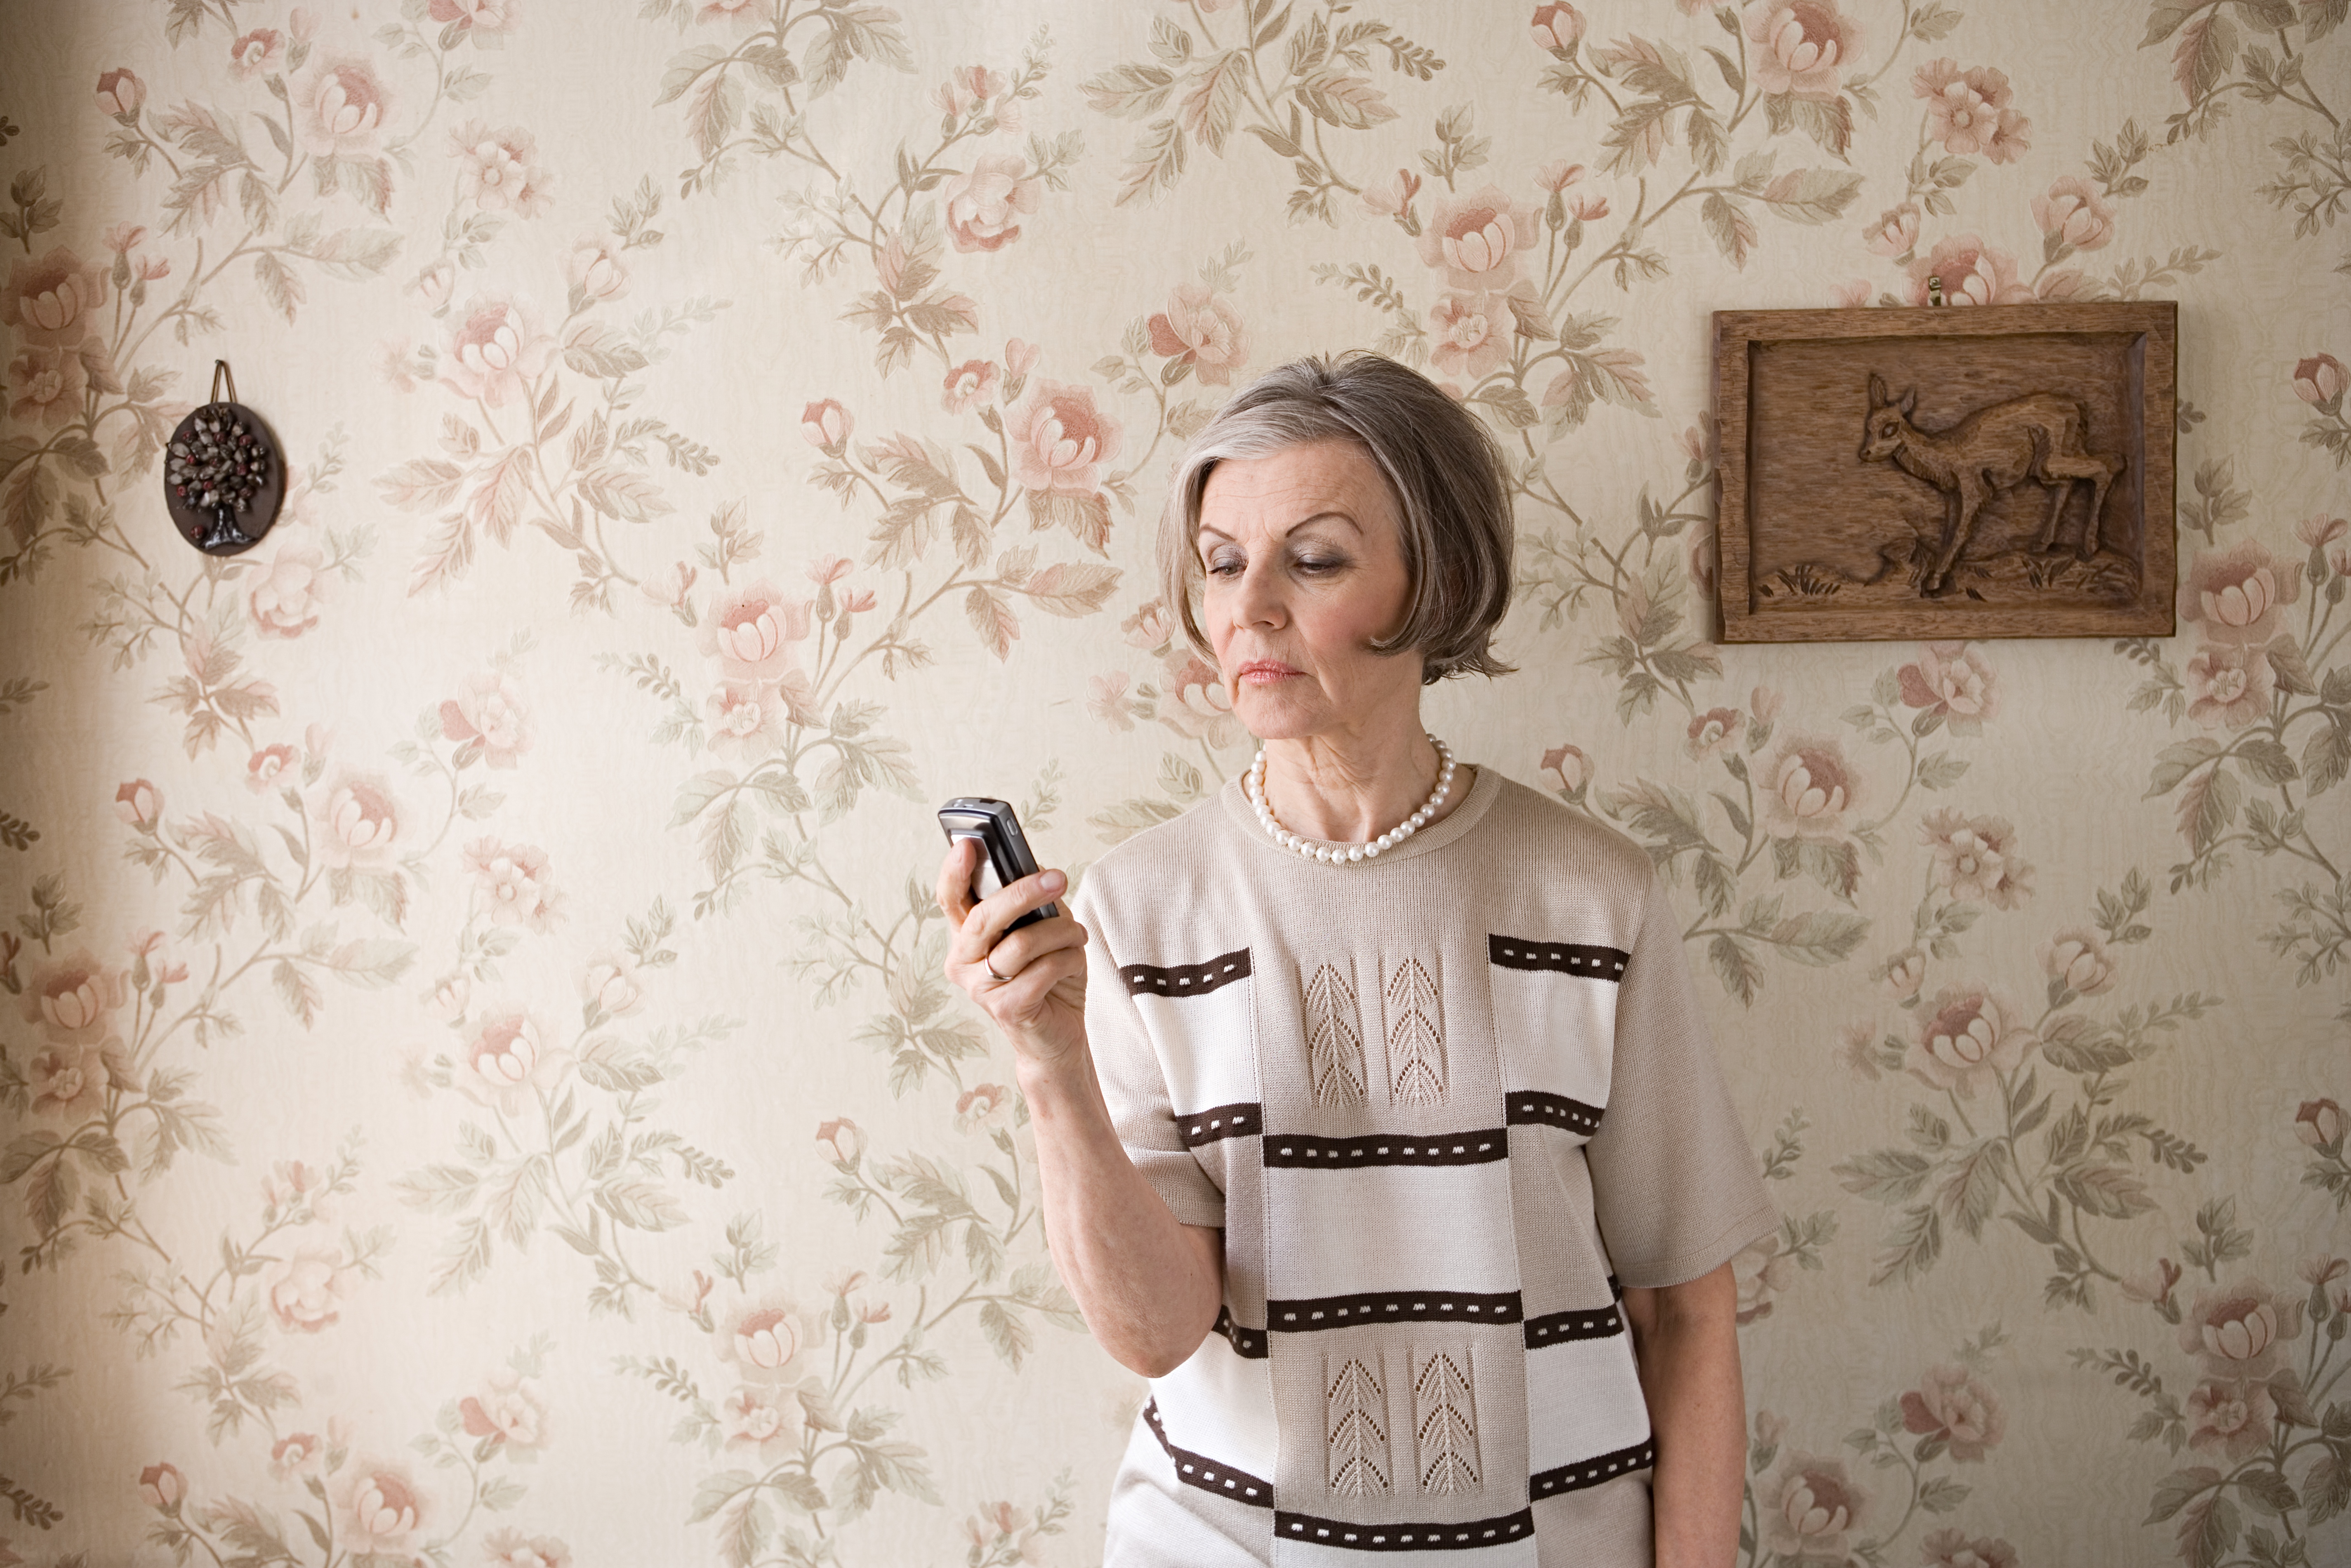 Senior woman with cell phone | Source: Getty Images